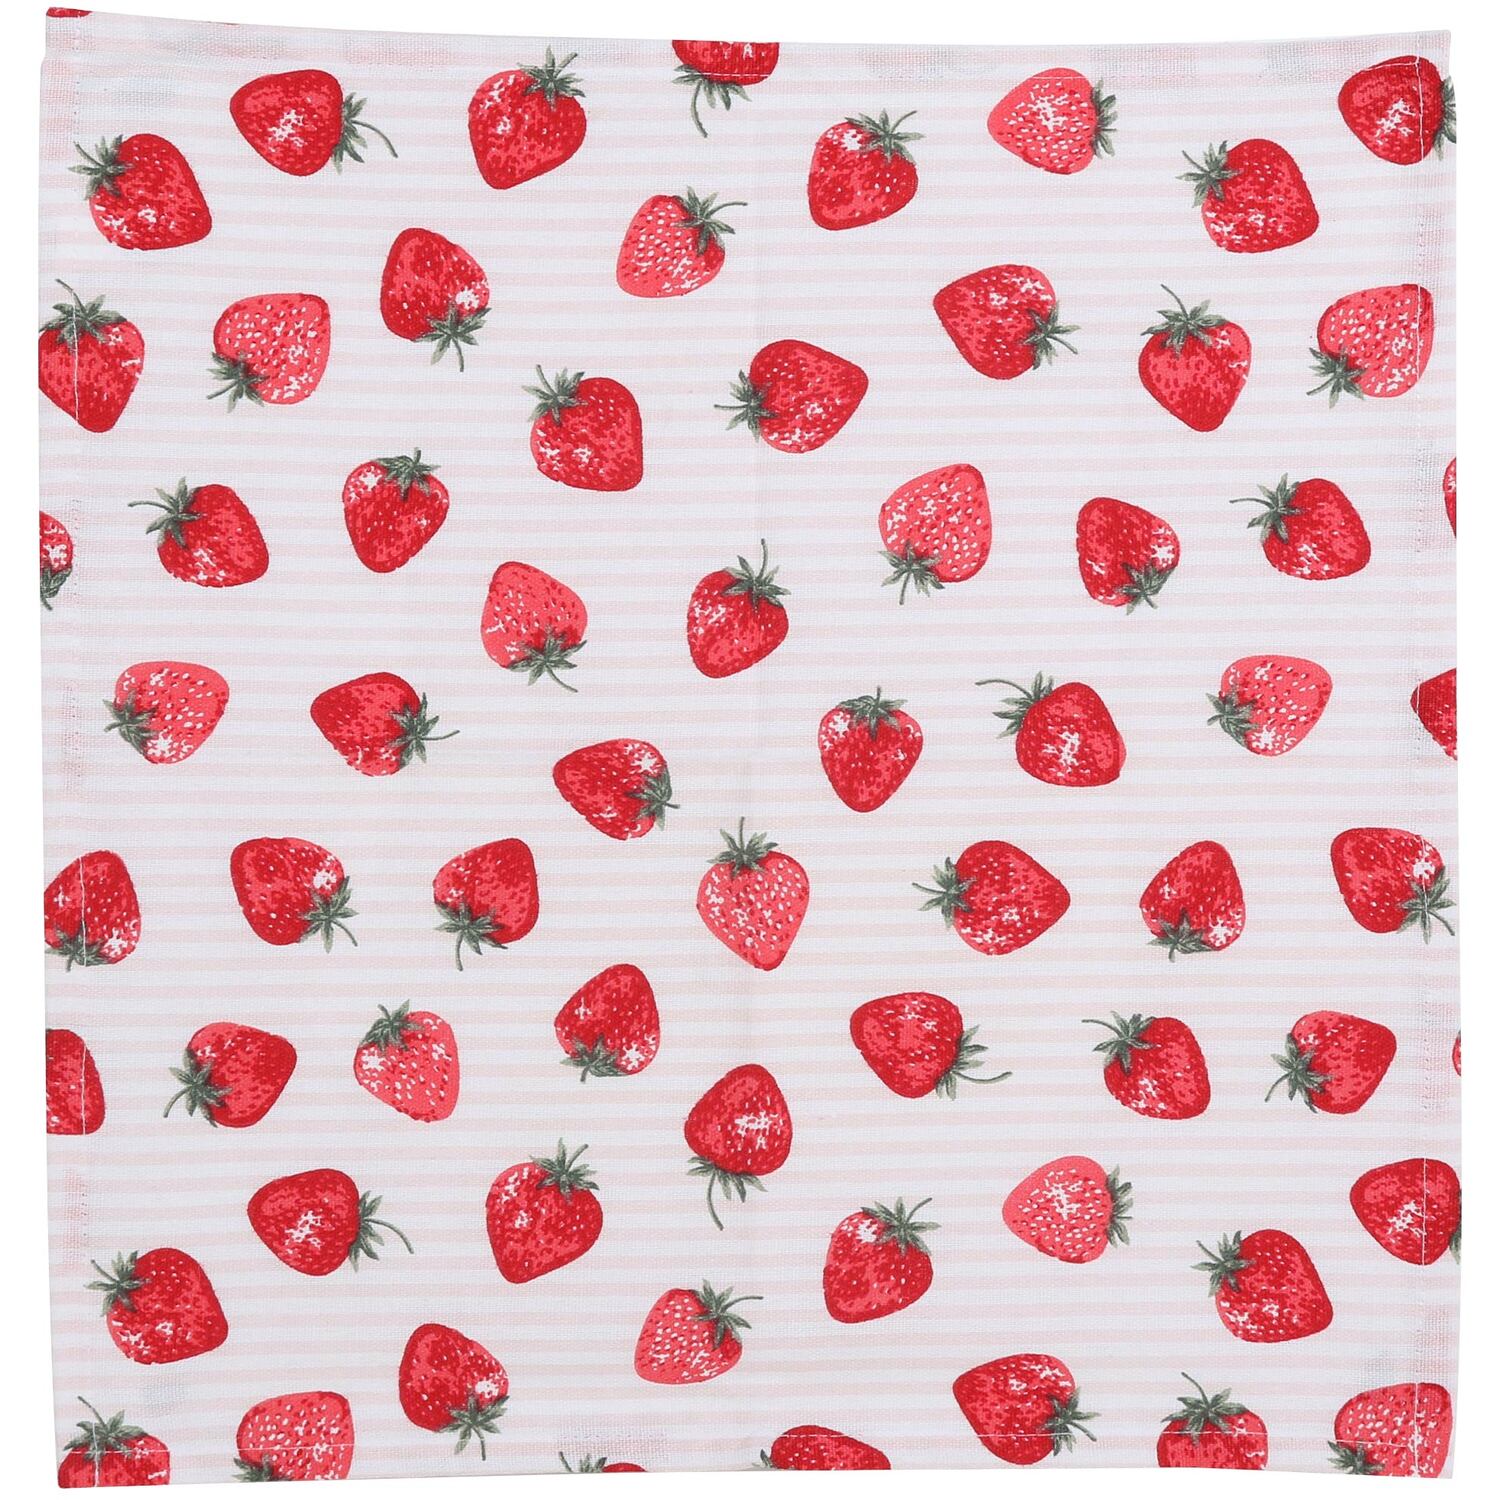 Pack of 2 Strawberry Napkins - Red Image 8